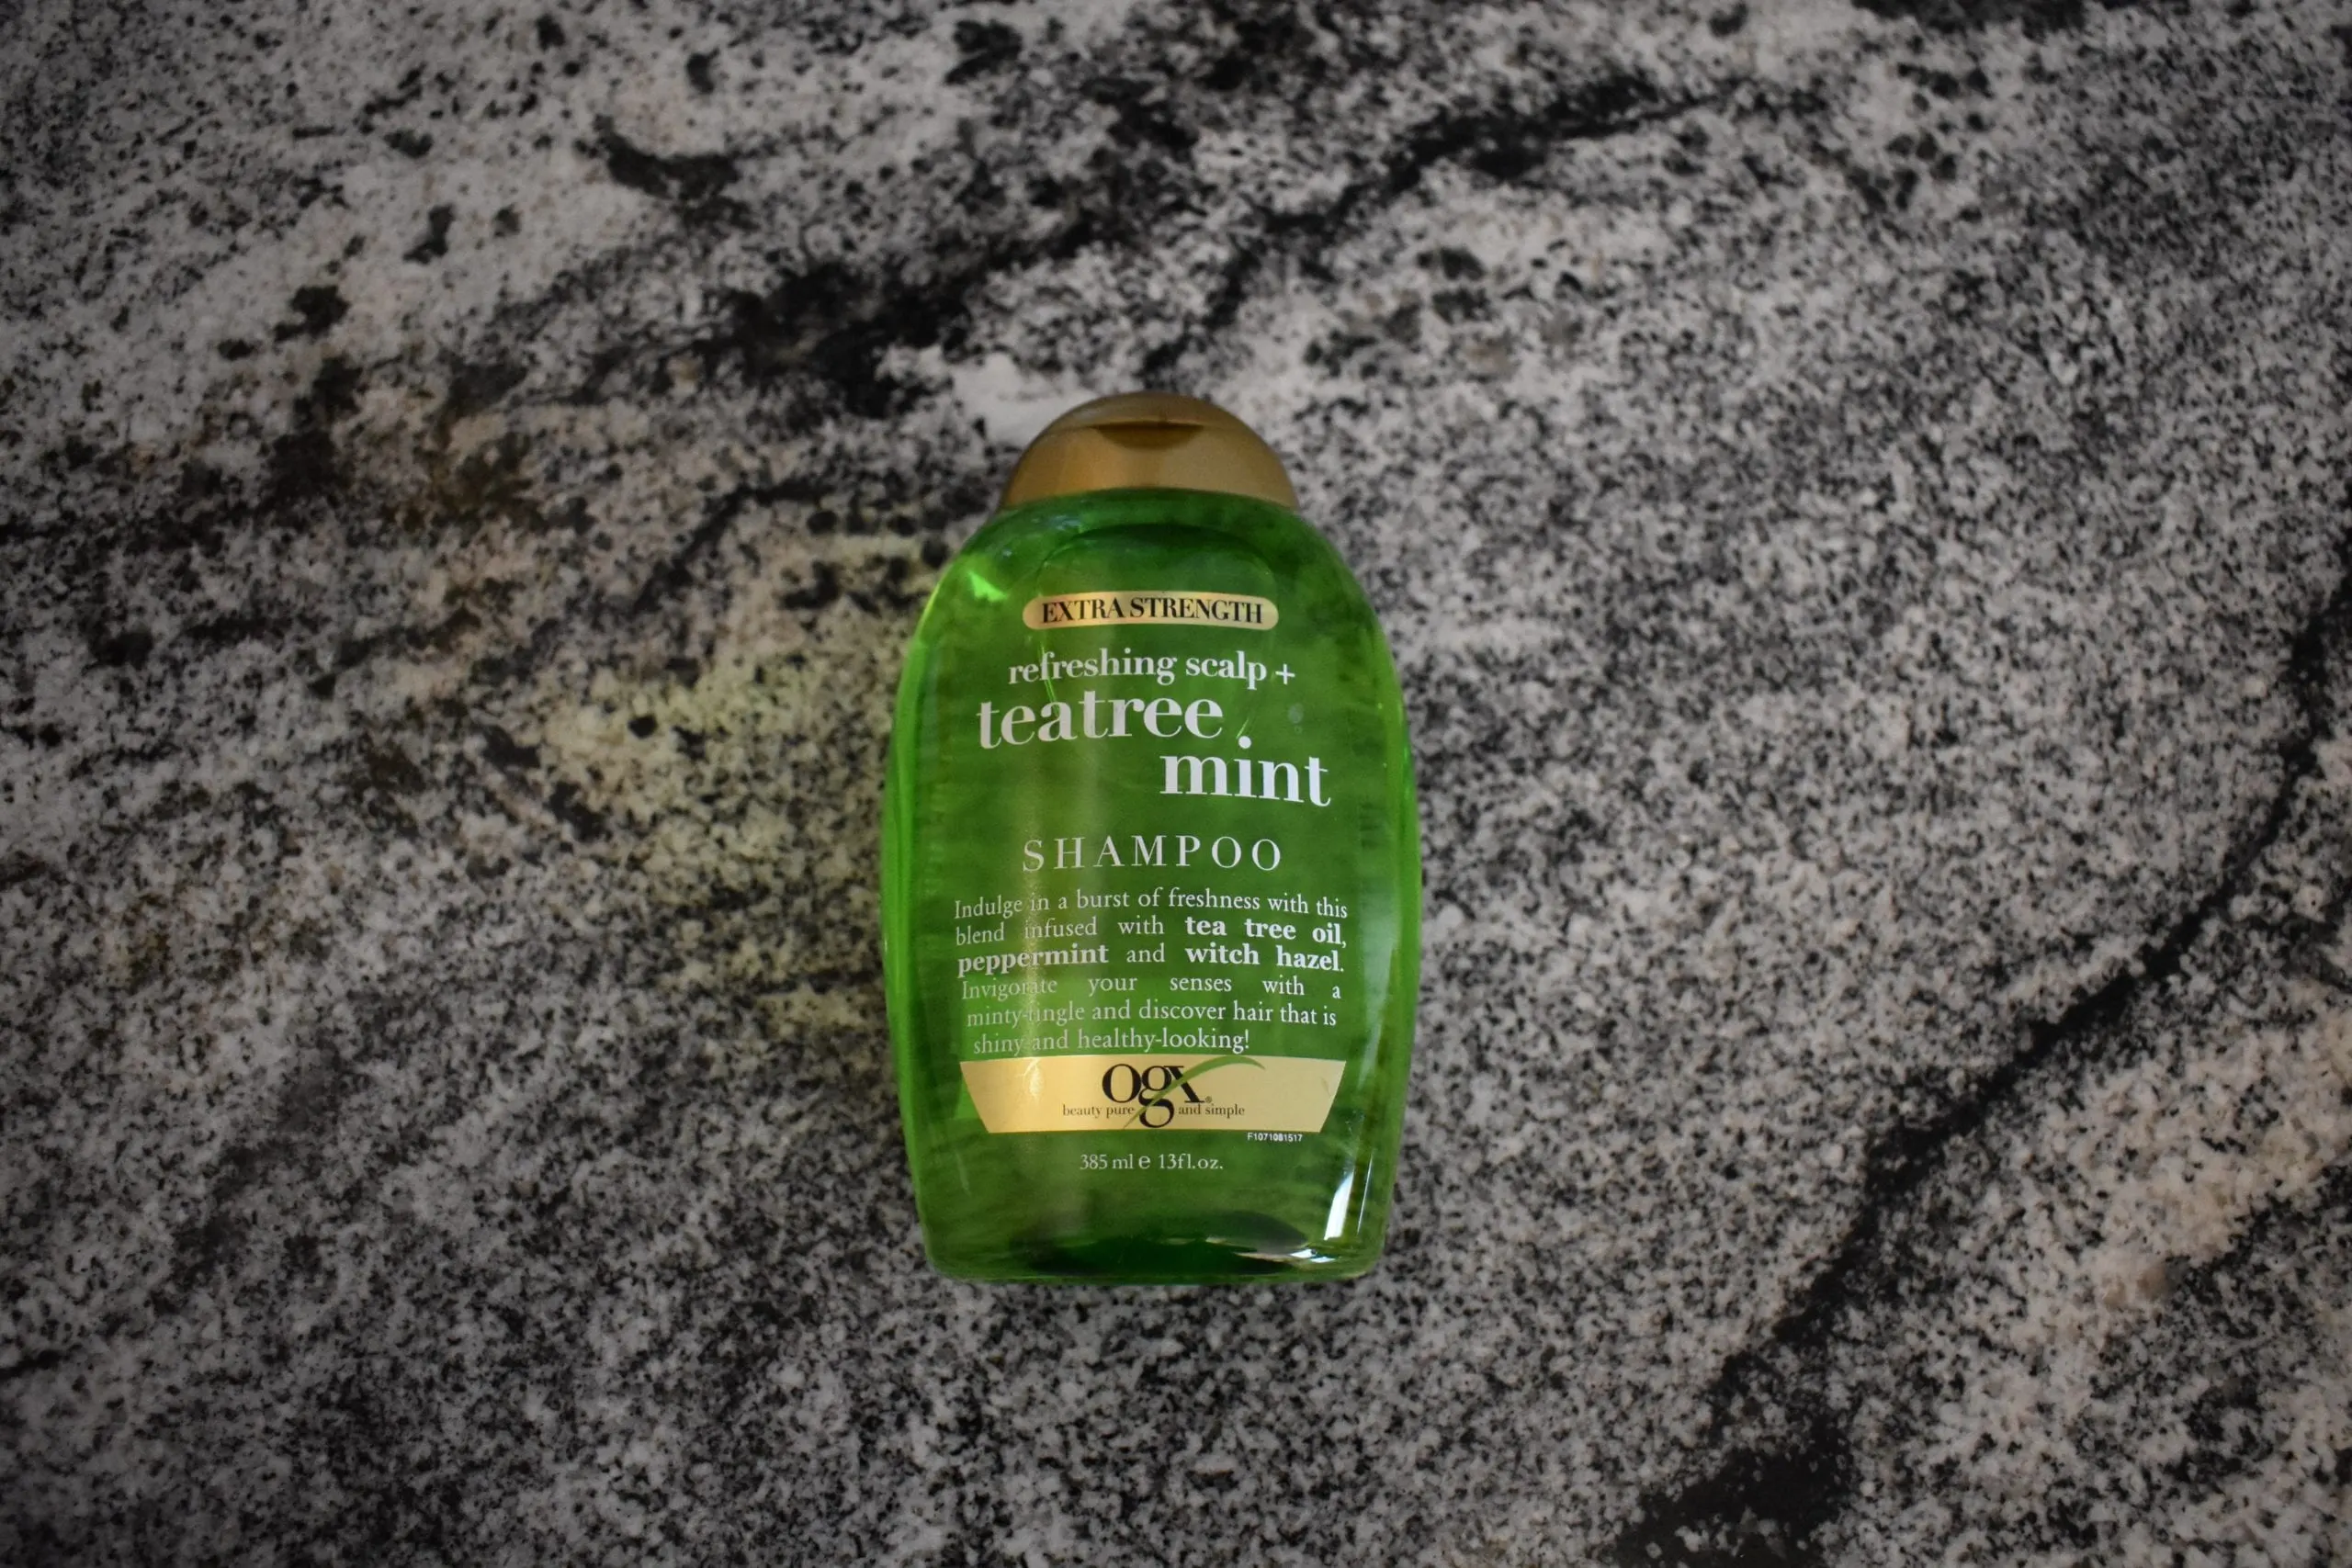 OGX refreshing scalp and tee tree mint, one of the best shampoos